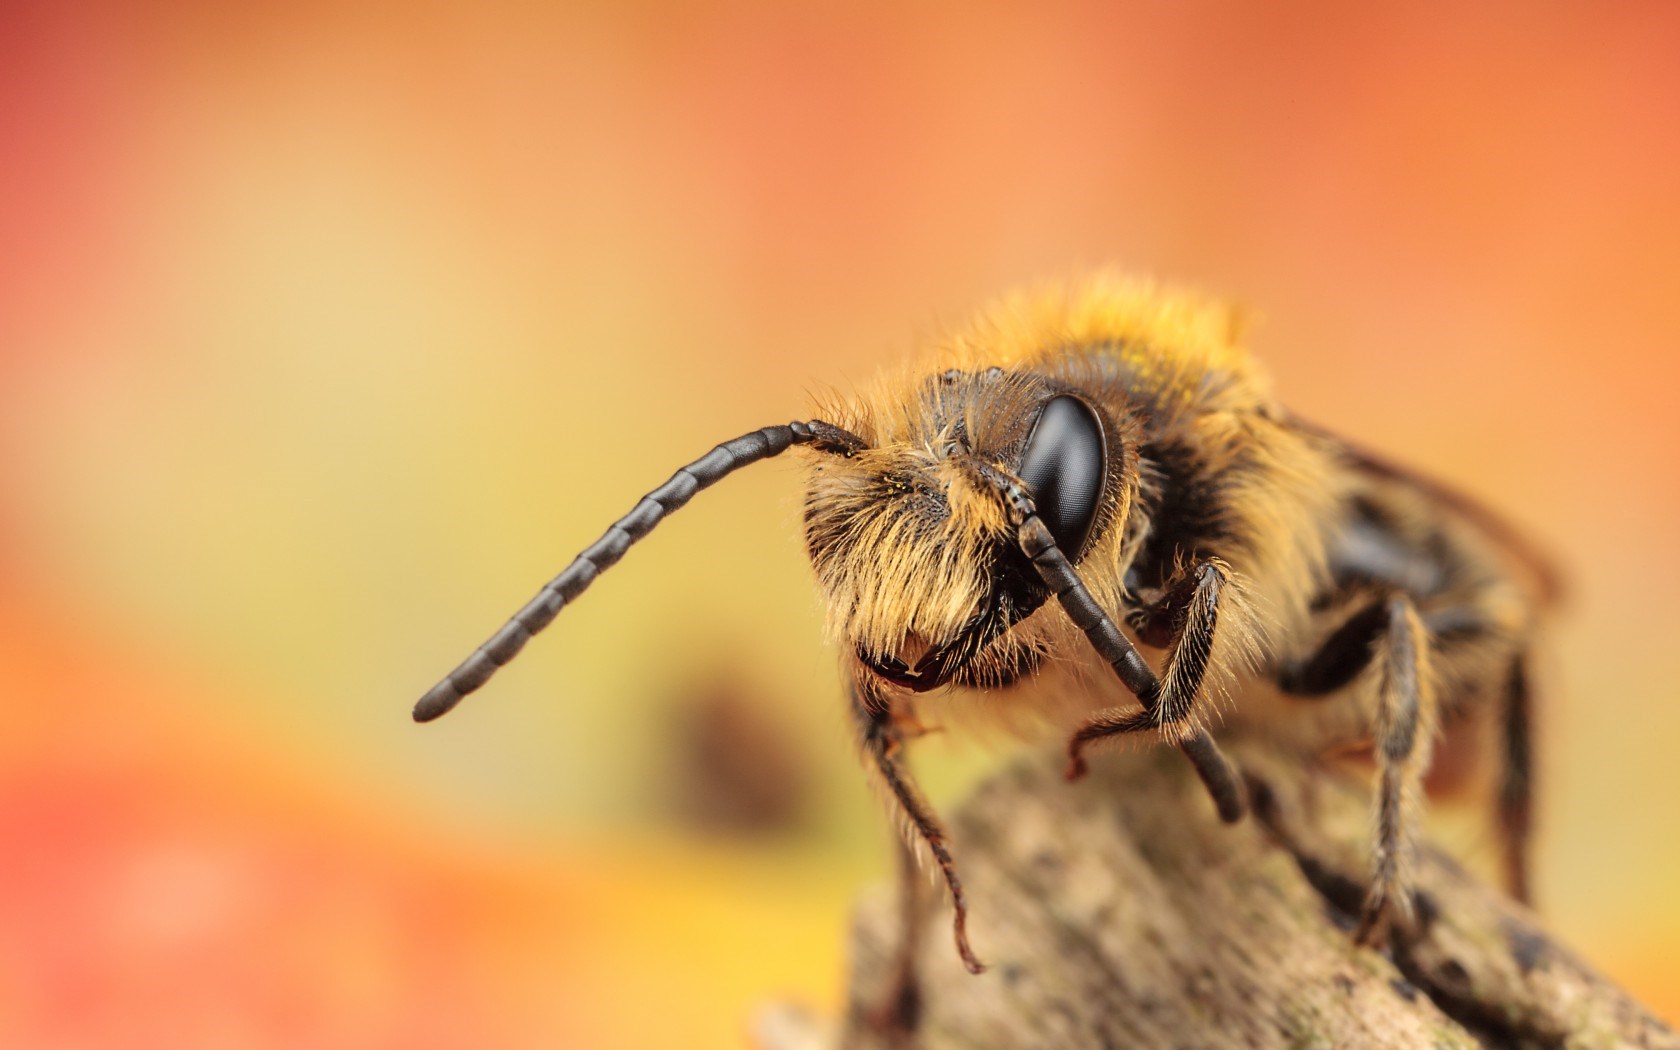 Bee Wallpaper HD Pictures One Background